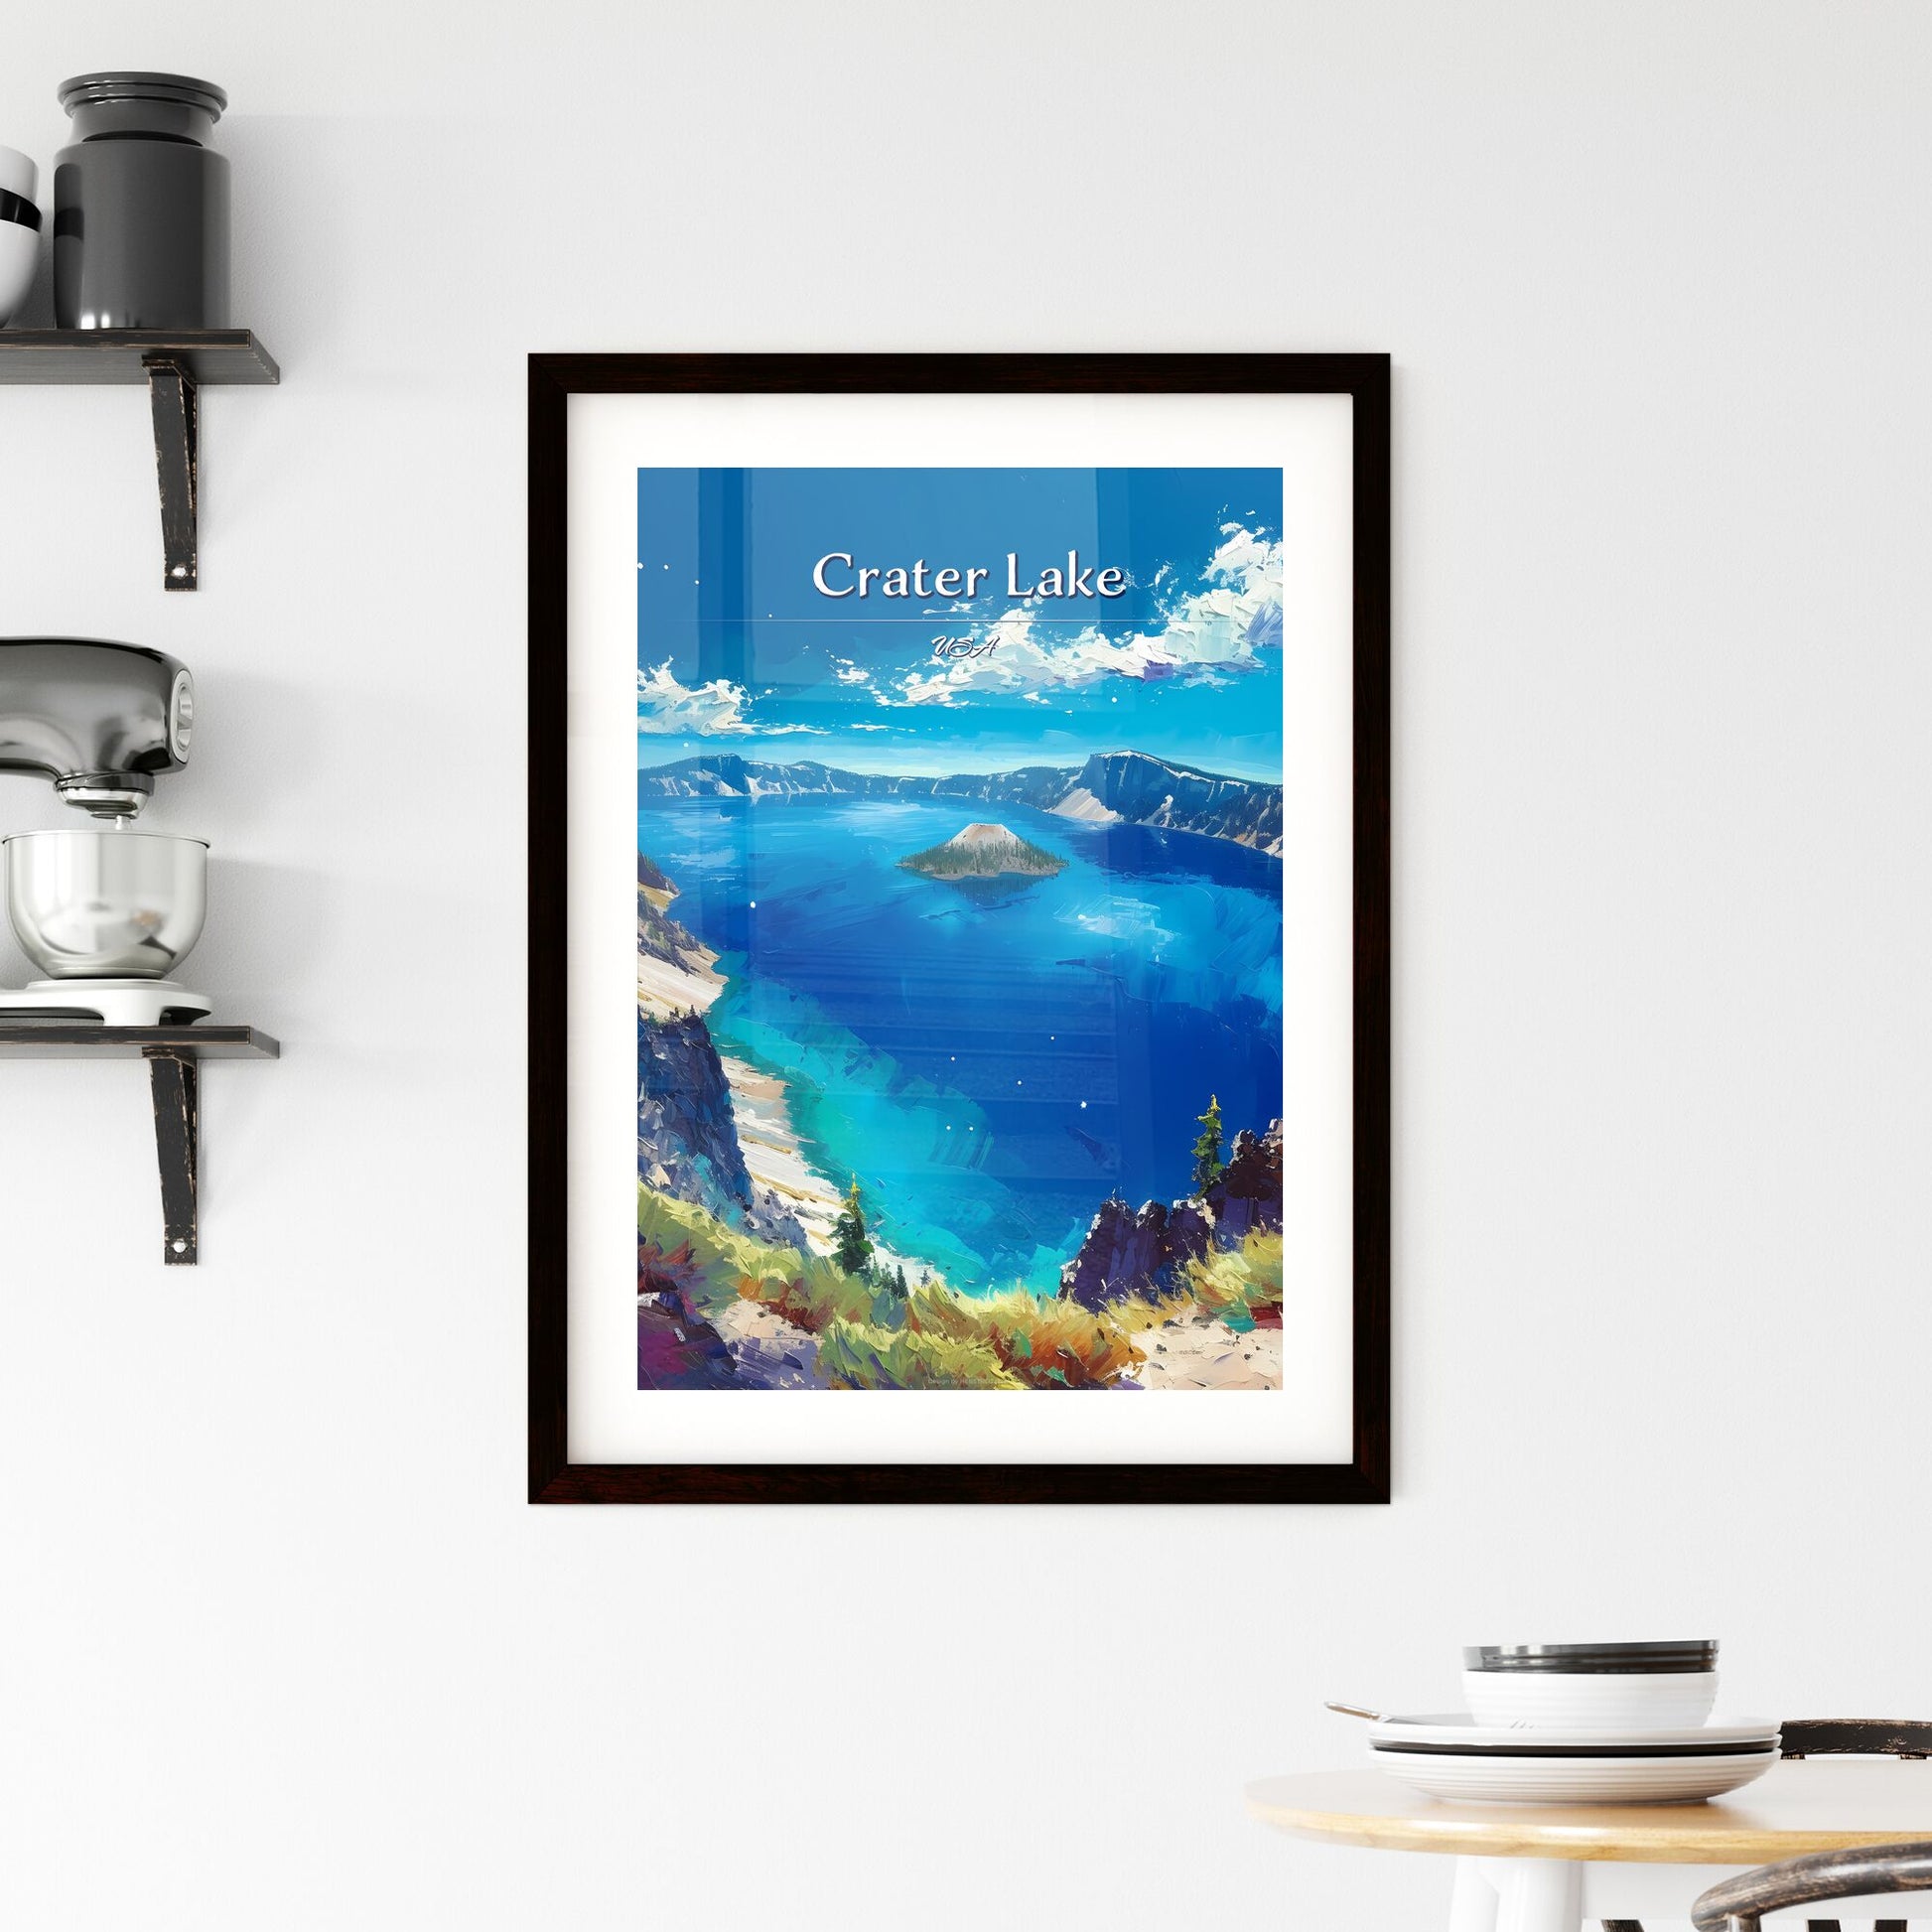 Crater Lake, USA - Art print of a large body of water with a small island in the middle Default Title